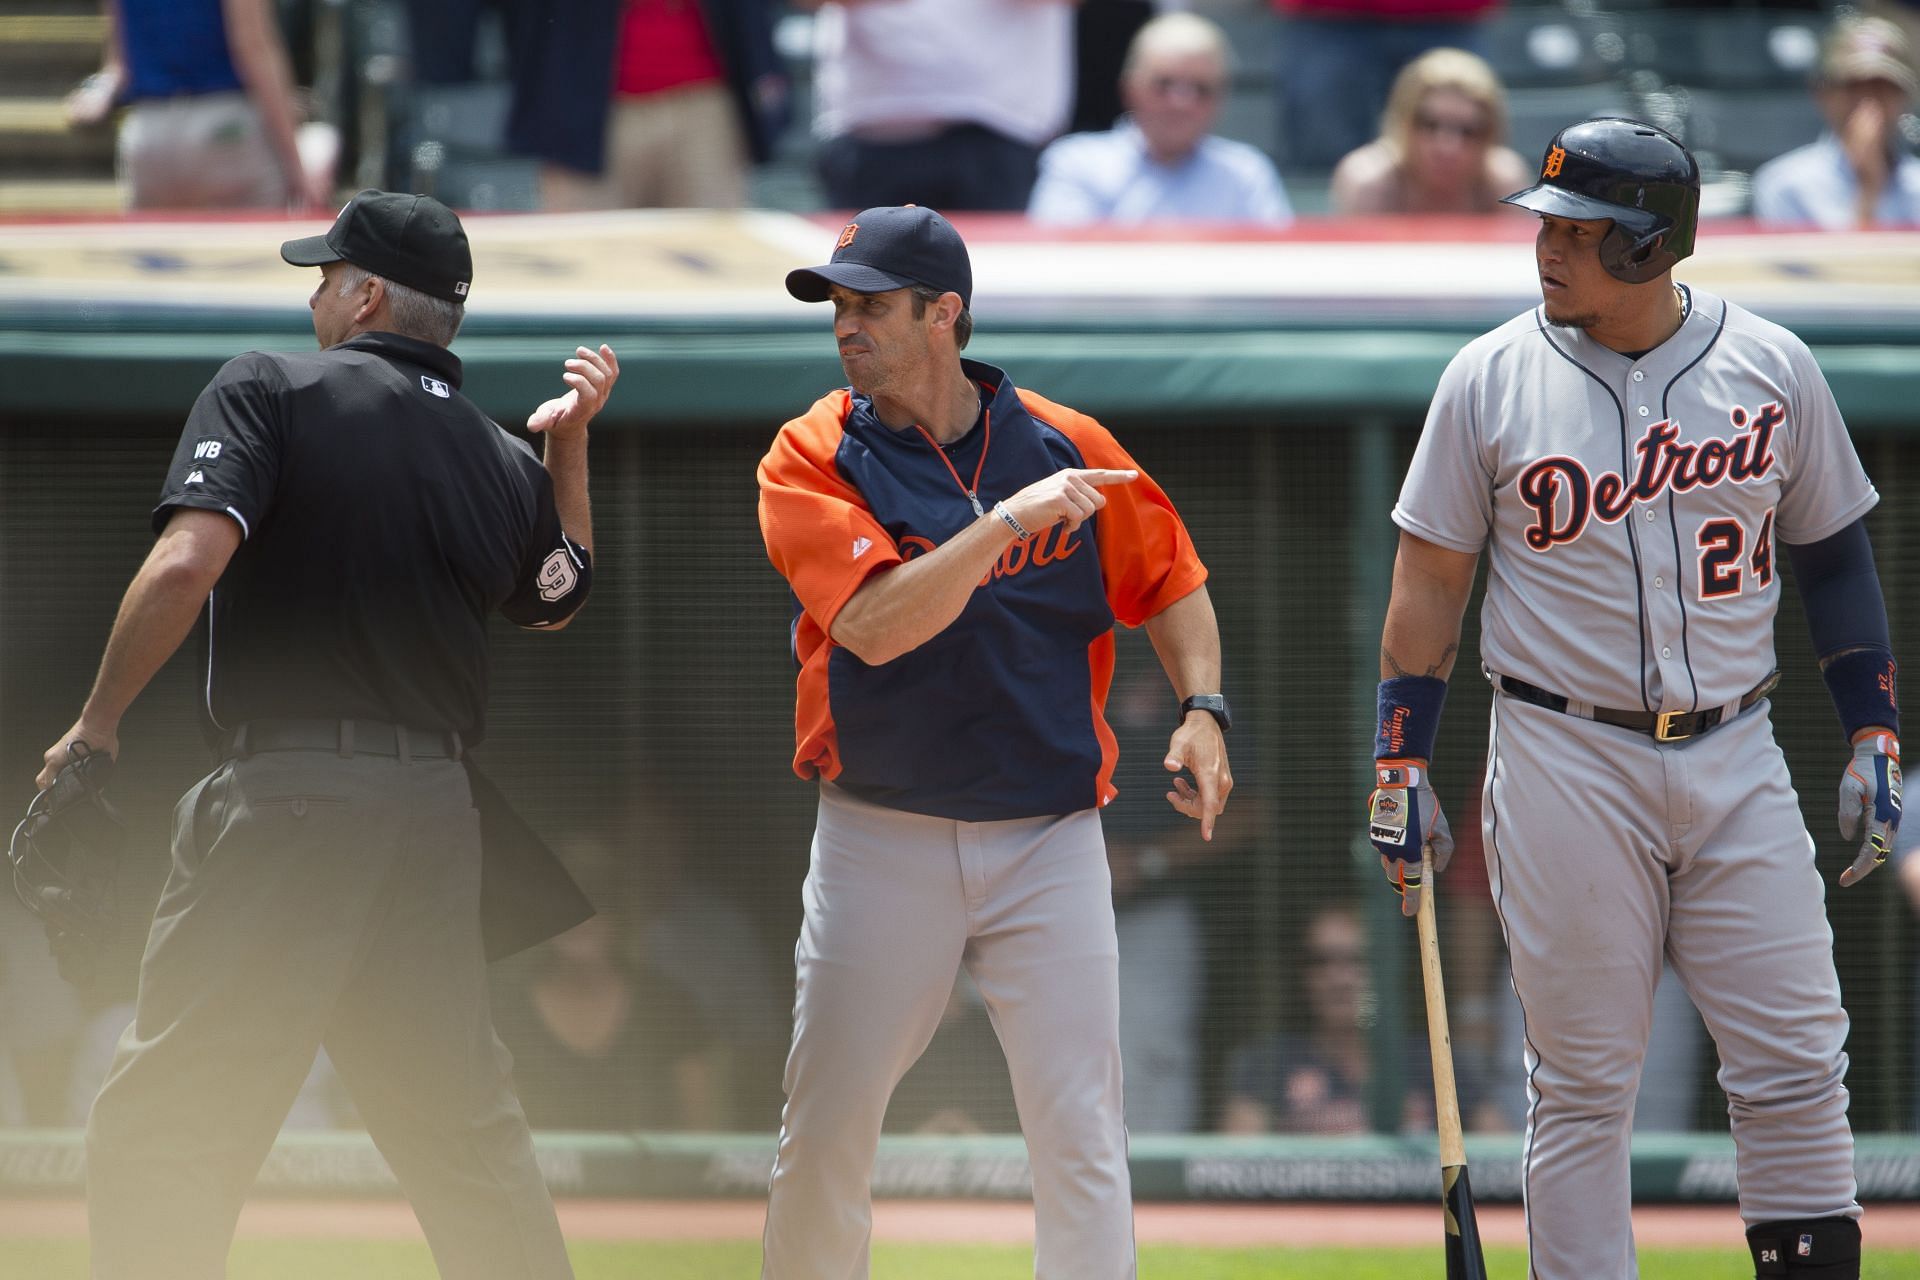 Home plate umpire Tim Timmons #95 ejects manager Brad Ausmus #7